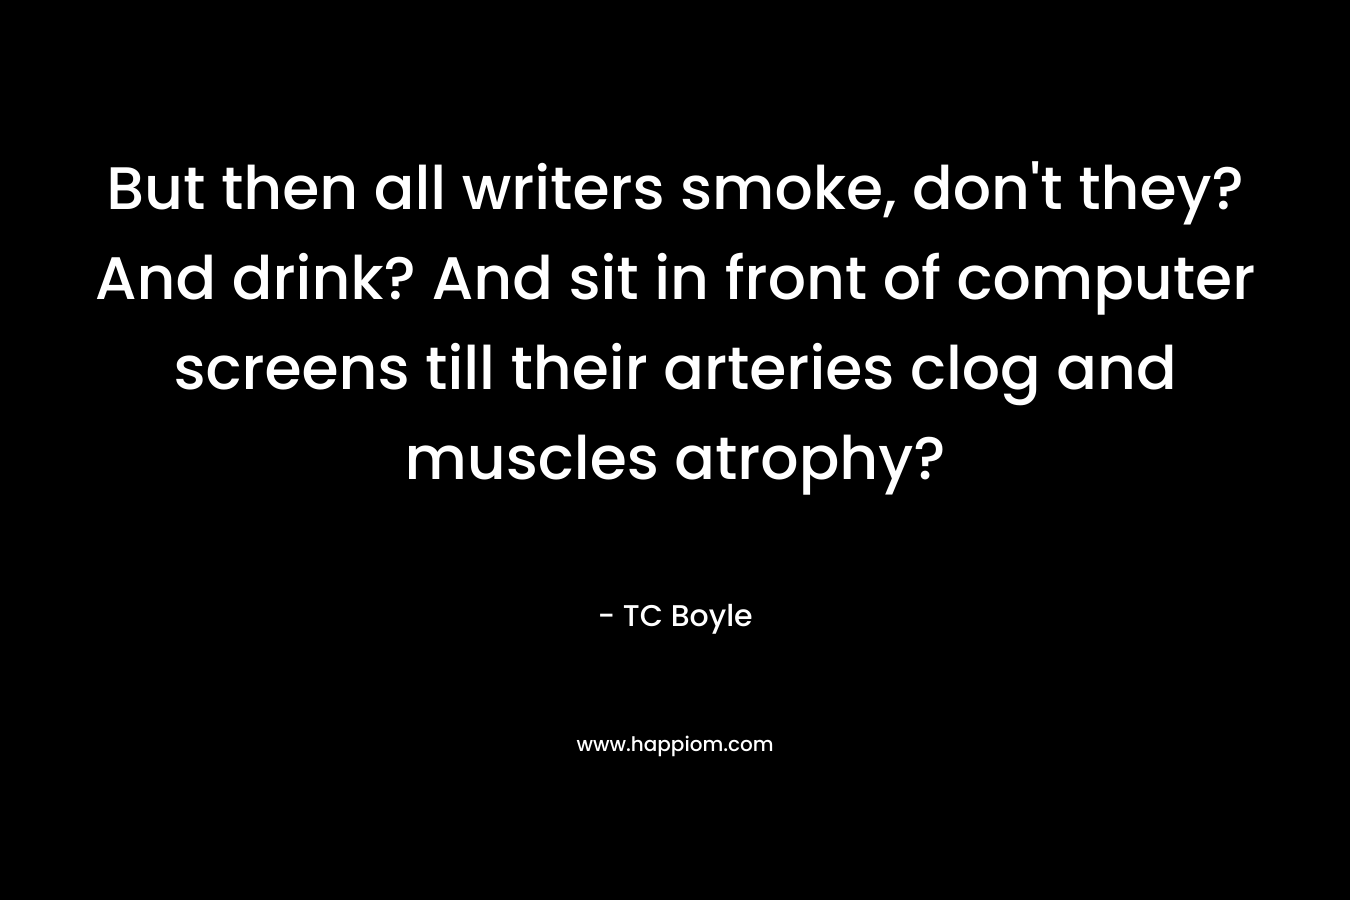 But then all writers smoke, don't they? And drink? And sit in front of computer screens till their arteries clog and muscles atrophy?